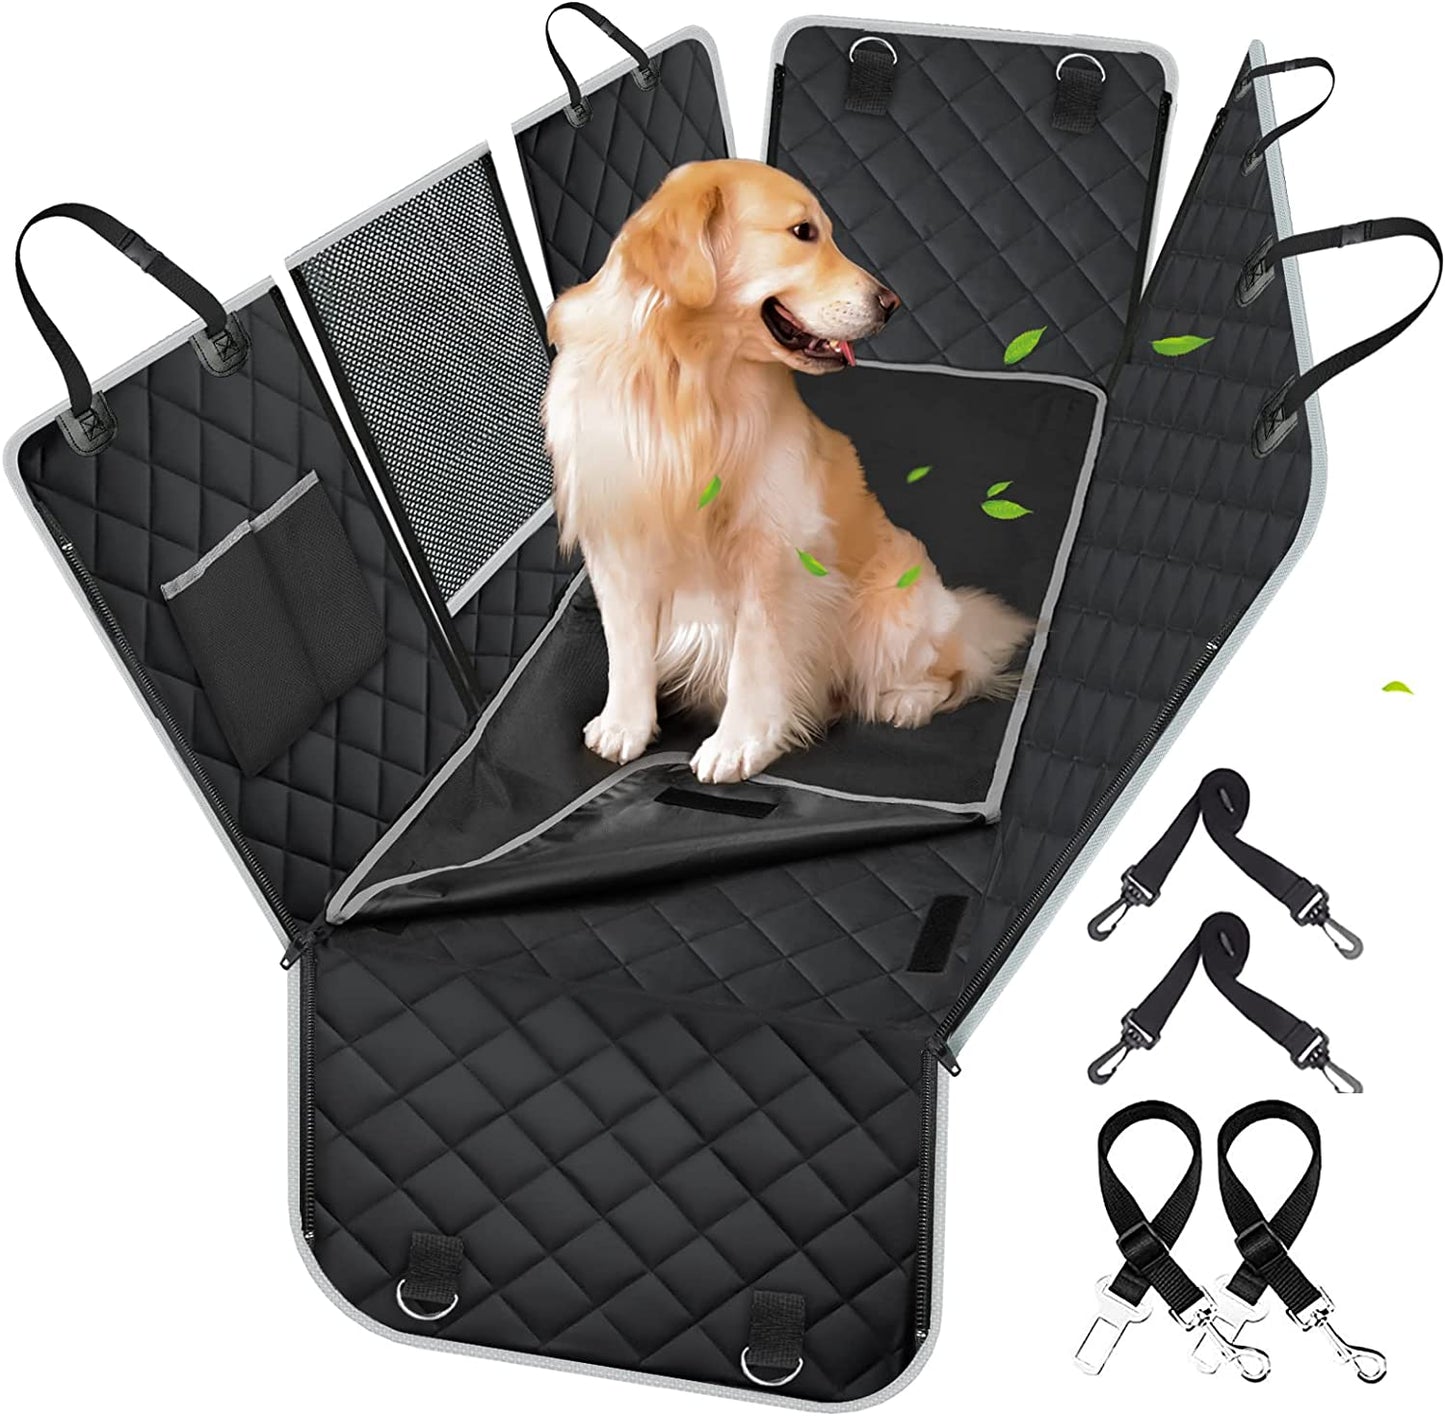 Car Dog Cover Back Seat - Car Hammock for Dogs - Dog Car Seat Cover for  Back Seat Waterproof, Dog Hammock for Car Backseat with Mesh Window - China  Dog Back Seat